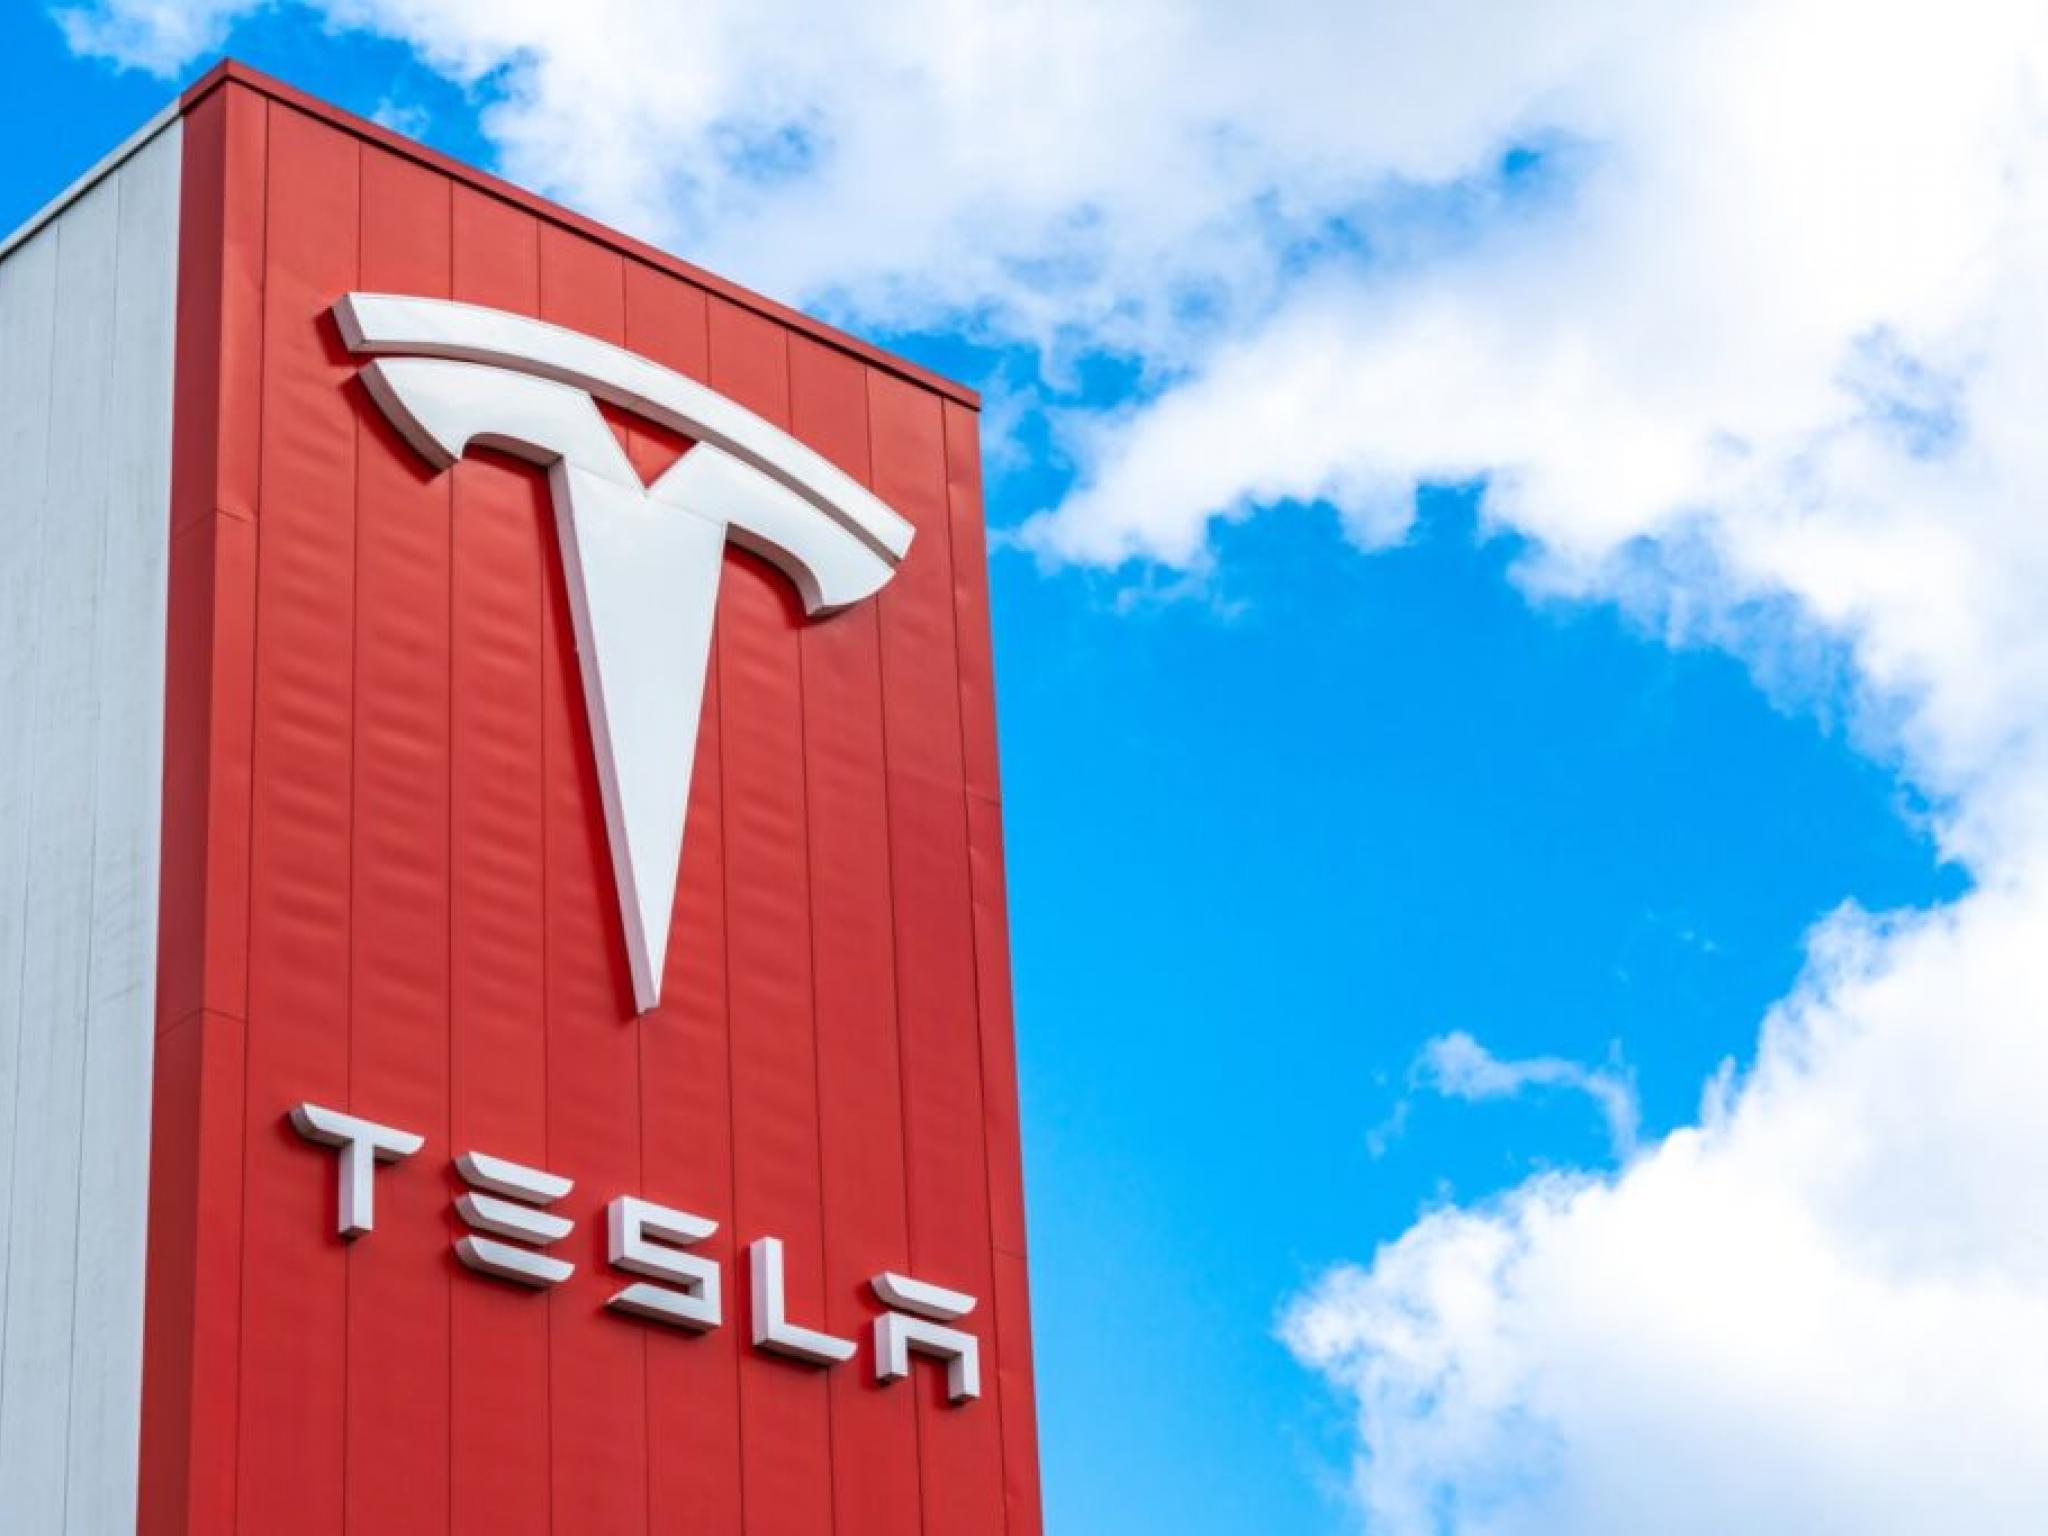  not-good-for-tesla-if-its-true-says-fund-manager-as-new-report-says-ev-maker-has-put-sub-30k-vehicle-on-hold 